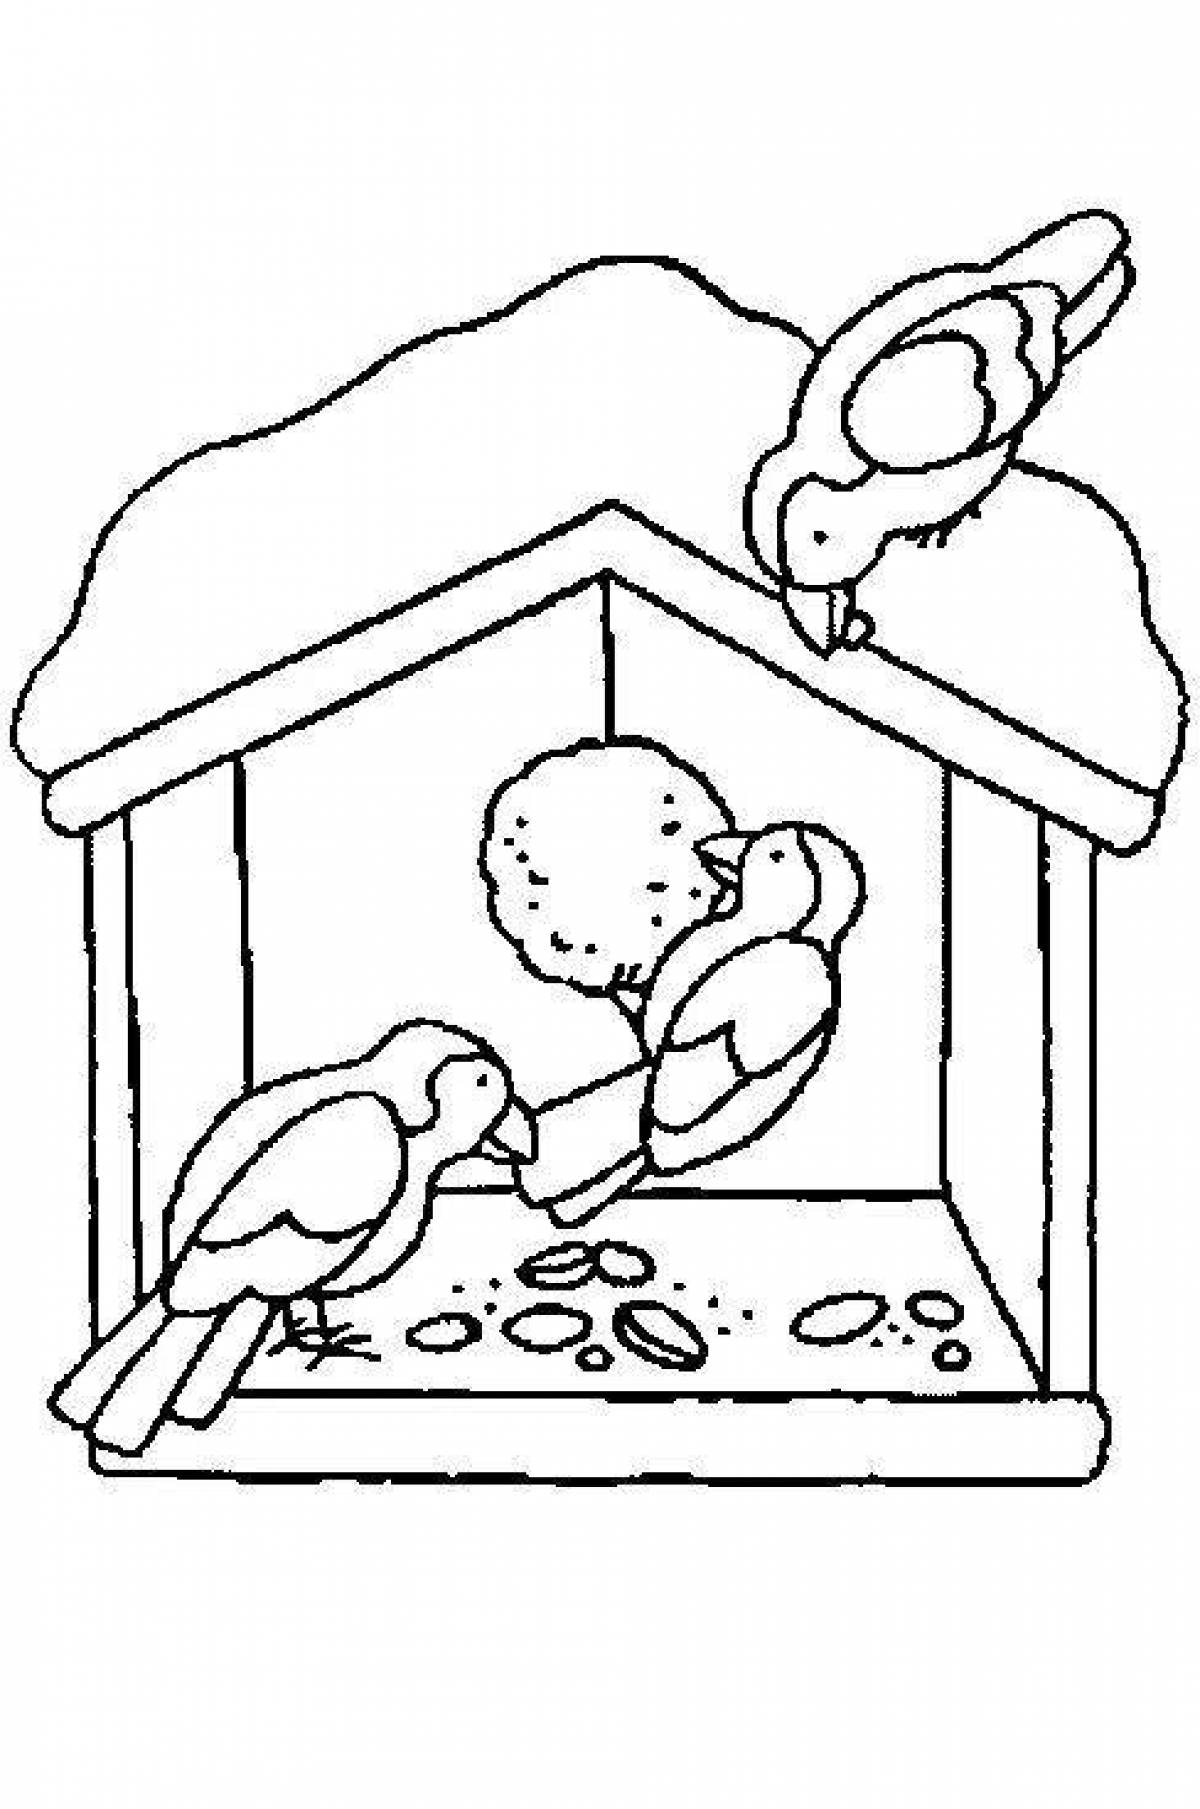 Incredible bird feeder coloring book for toddlers